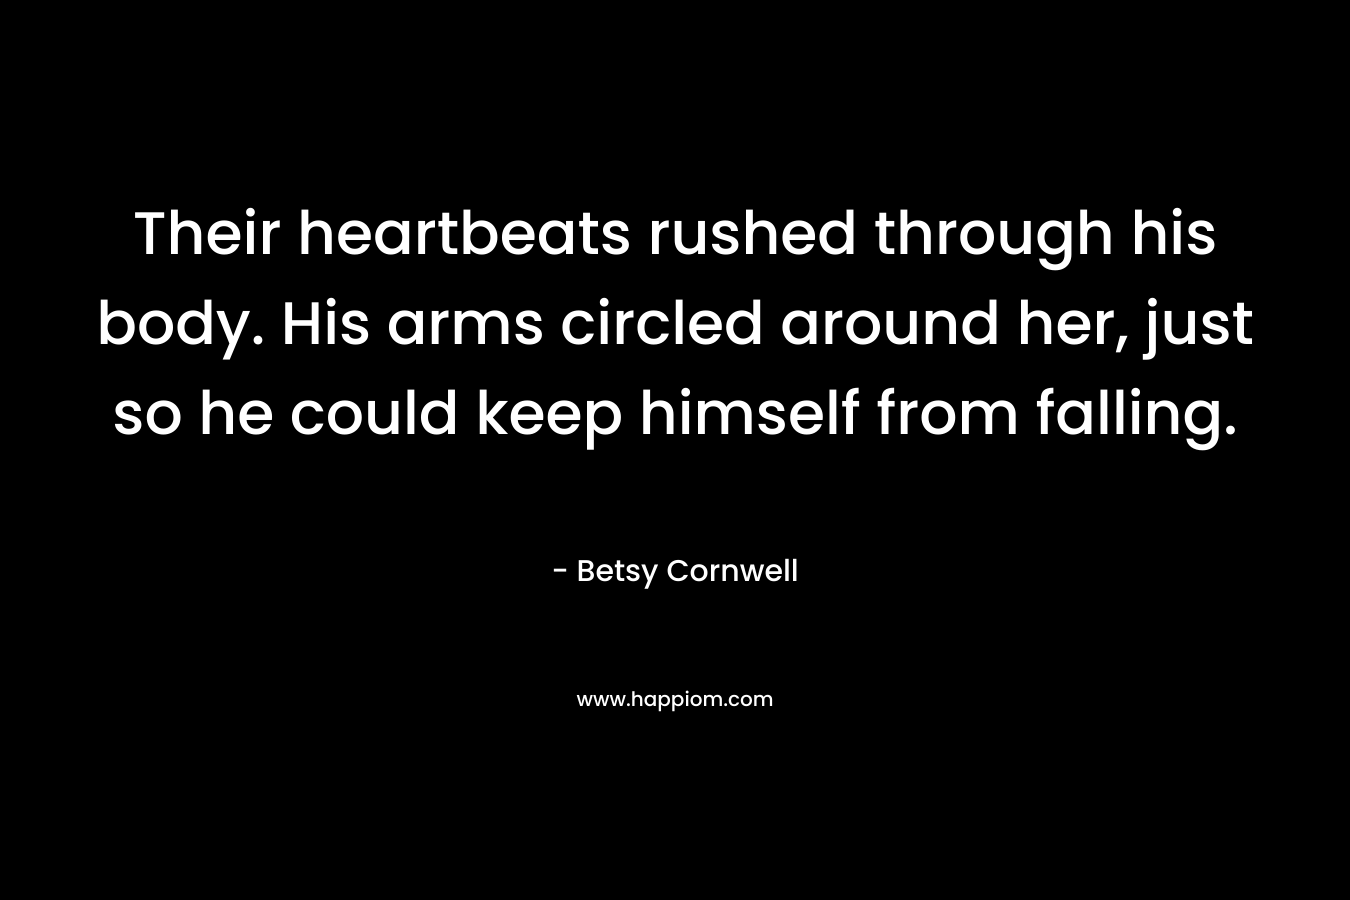 Their heartbeats rushed through his body. His arms circled around her, just so he could keep himself from falling. – Betsy Cornwell